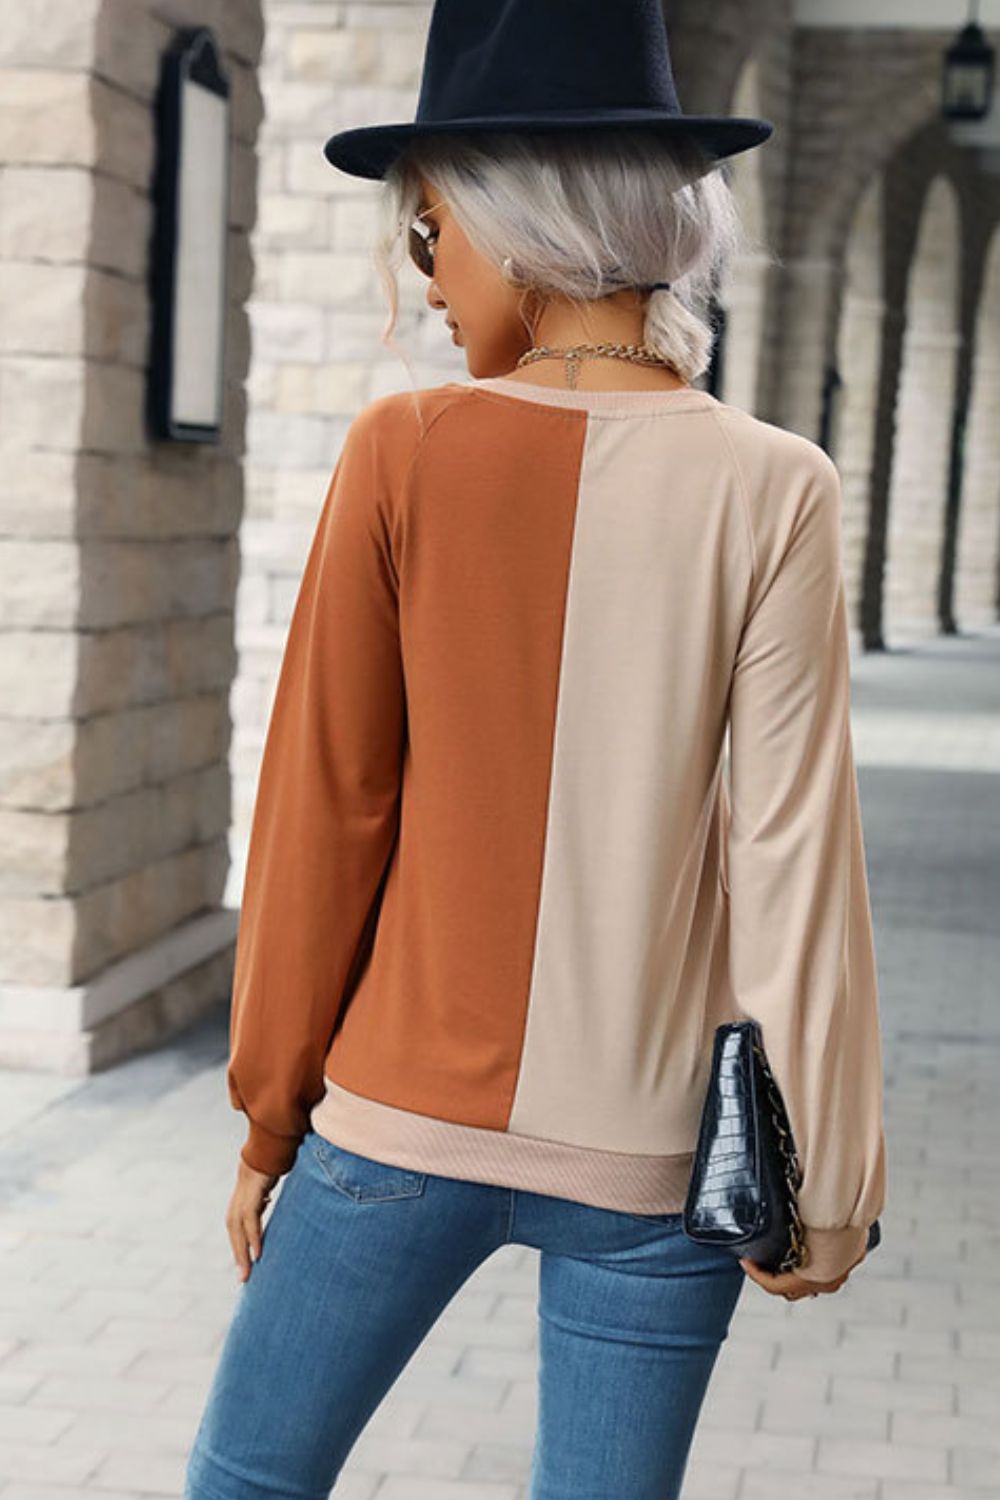 “Seeing Double” is a long sleeve sweatshirt featuring coloring blocking, round neckline, raglan sleeves, cuffed sleeves and hemline.The colors are khaki and brown. Sizes small through x-large.